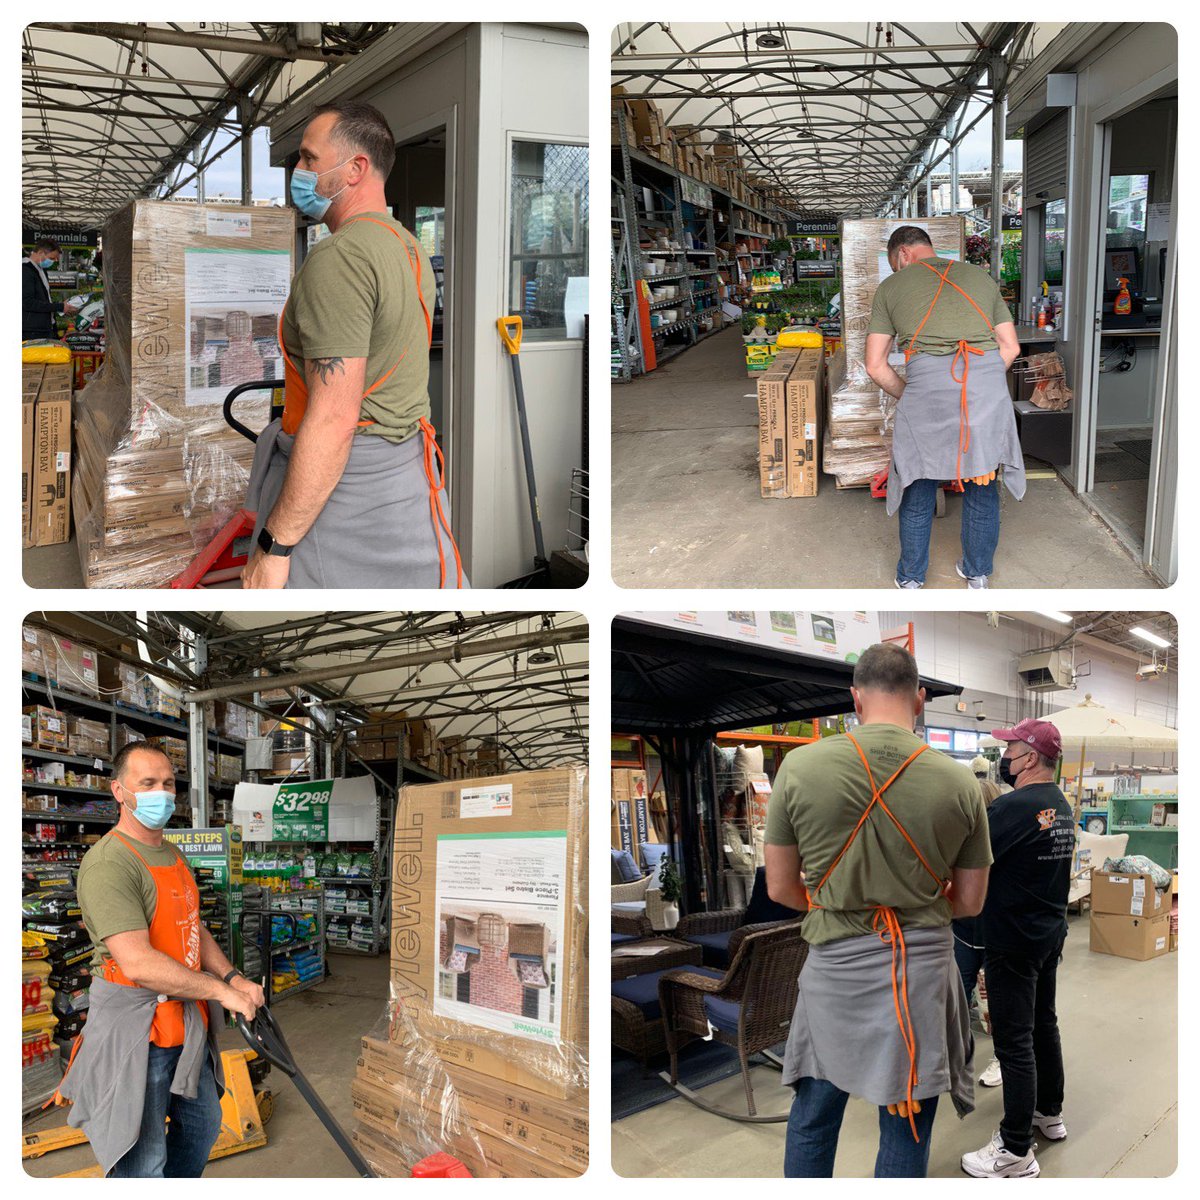 @MattKeatinghd Thank you Boss for helping out today in D28. Sorry I had you for the mulch pit. Next time I’ll schedule you for Grills or Patio area😃.@nyyroro @marcel_louis6 @DHRMgregorio @msuero2631 @nelsonr1271 @JgrnautR @msnicholls32 @HESHAMfADEl16 @Tara_ASM0922